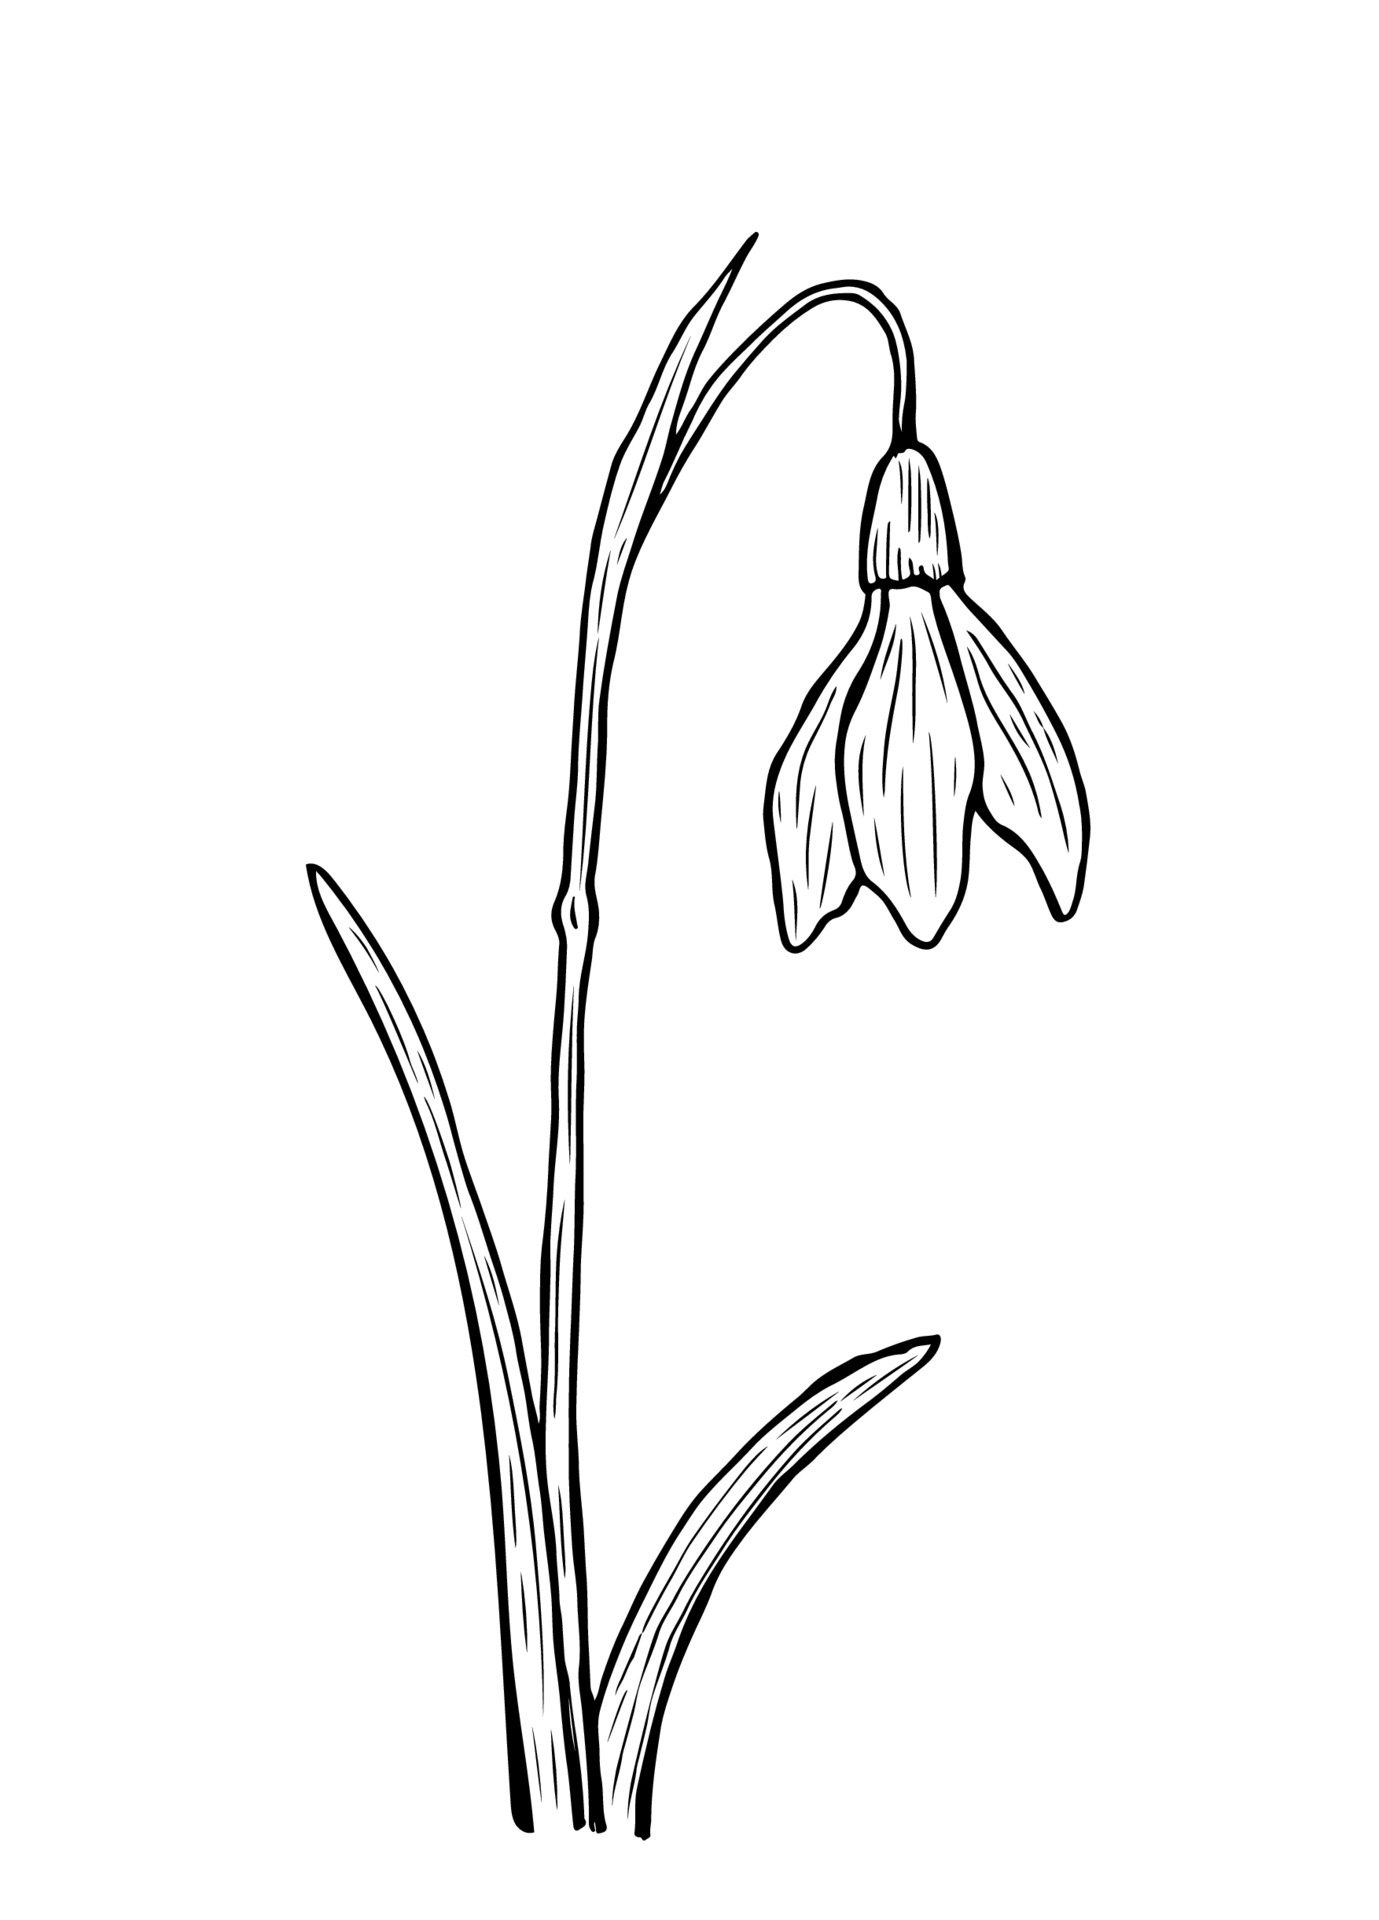 Snowdrop Flower Graphic Black White Isolated Sketch Illustration Vector  Stock Illustration  Download Image Now  iStock